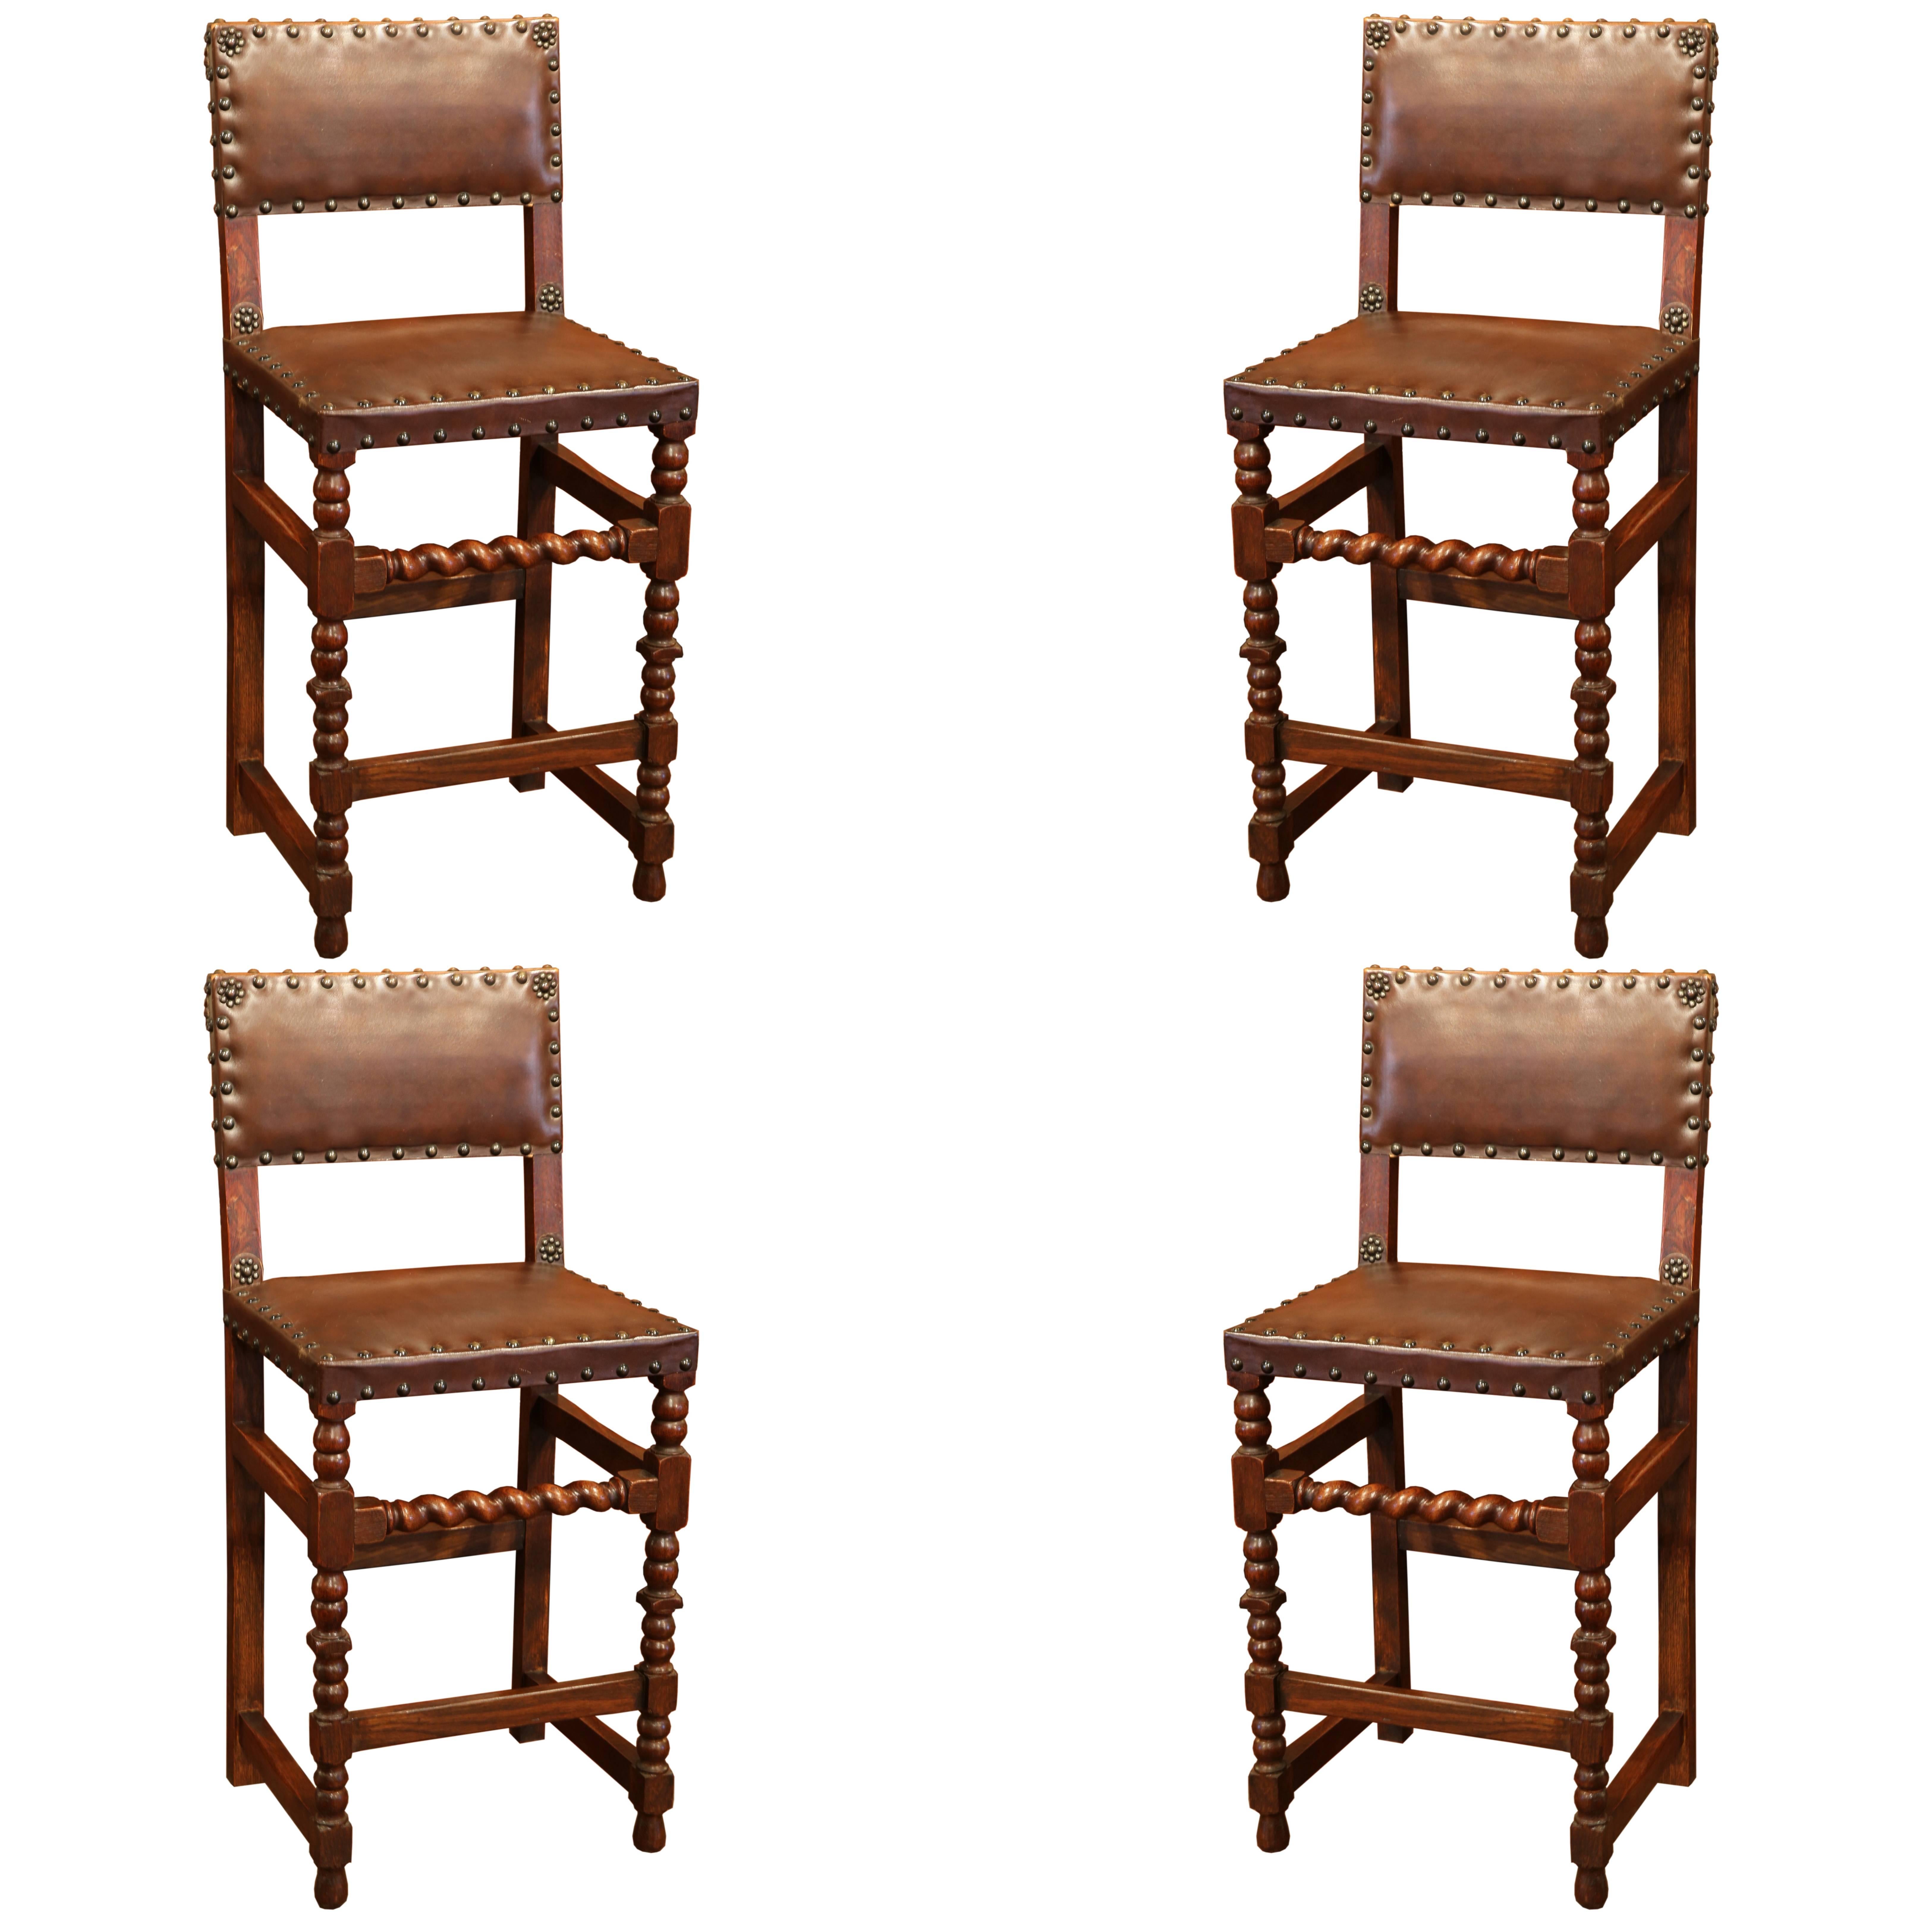 Set of Four 19th Century French Walnut Barstools with Original Leather and Nails